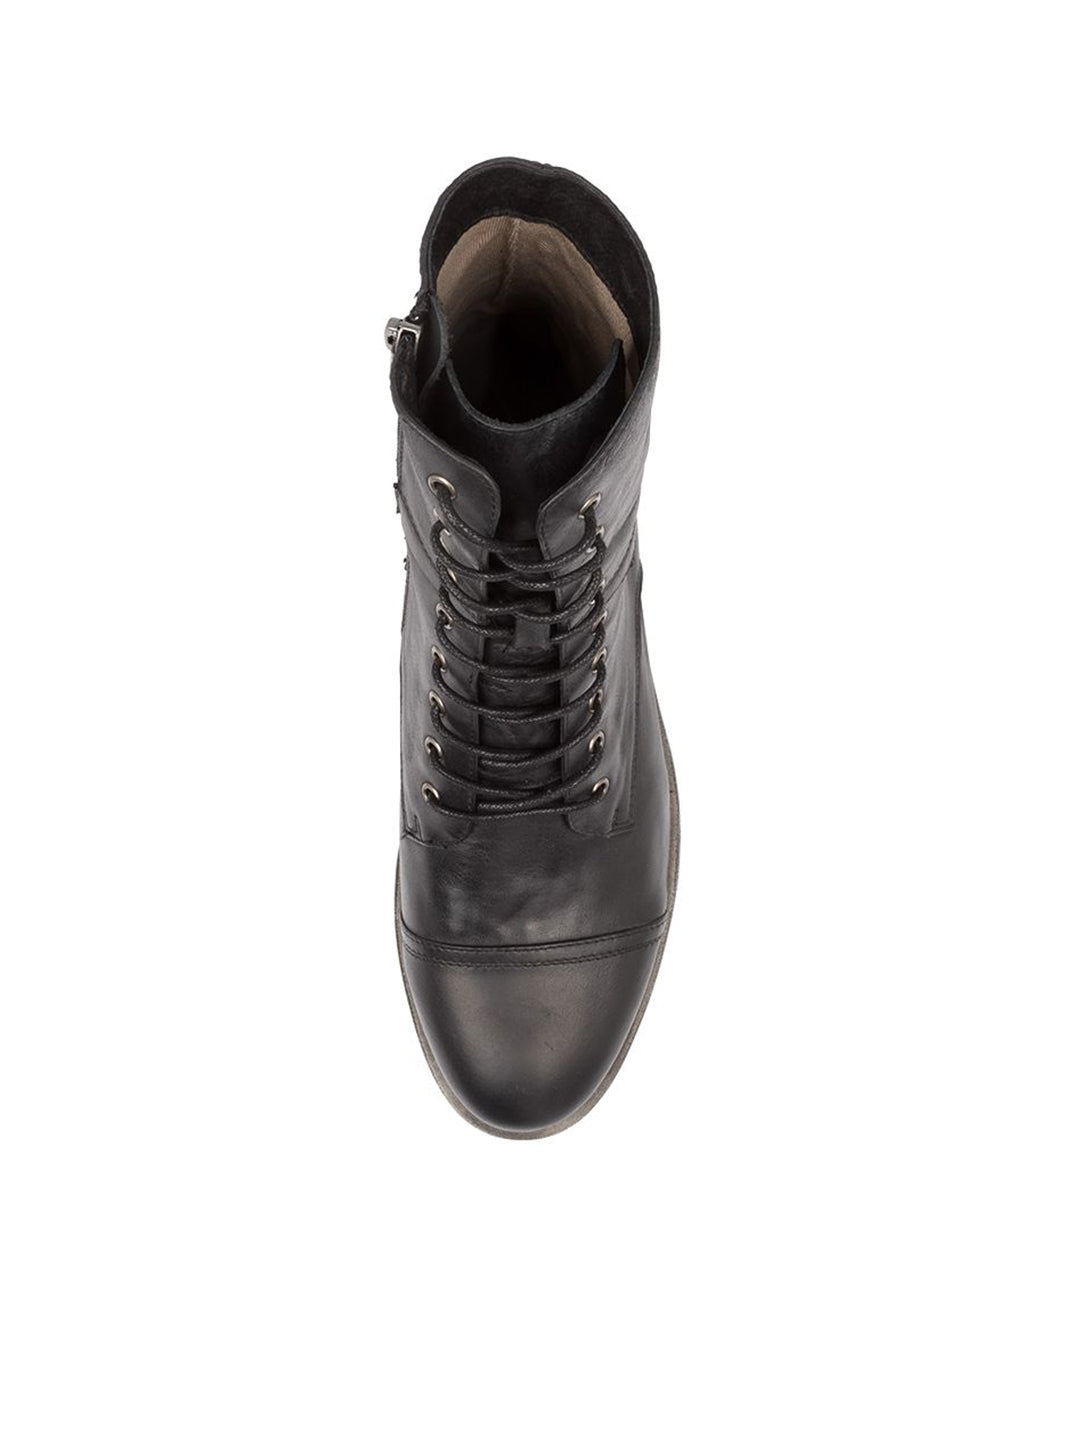 Django and Juliette Mekhi Leather Military Lace-up Boot - Black